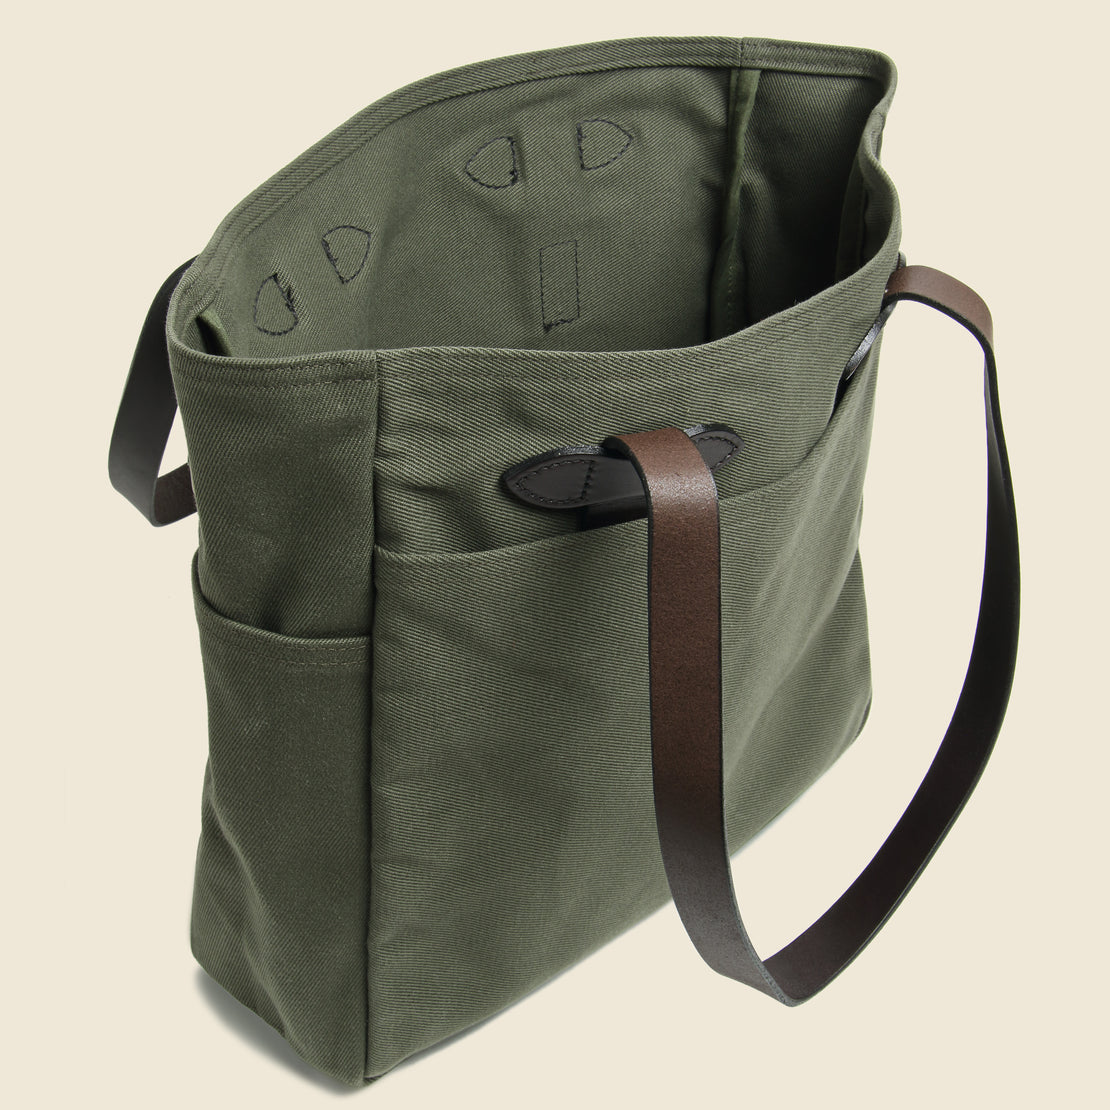 Rugged Twill Tote Bag - Otter Green - Filson - STAG Provisions - W - Accessories - Bag